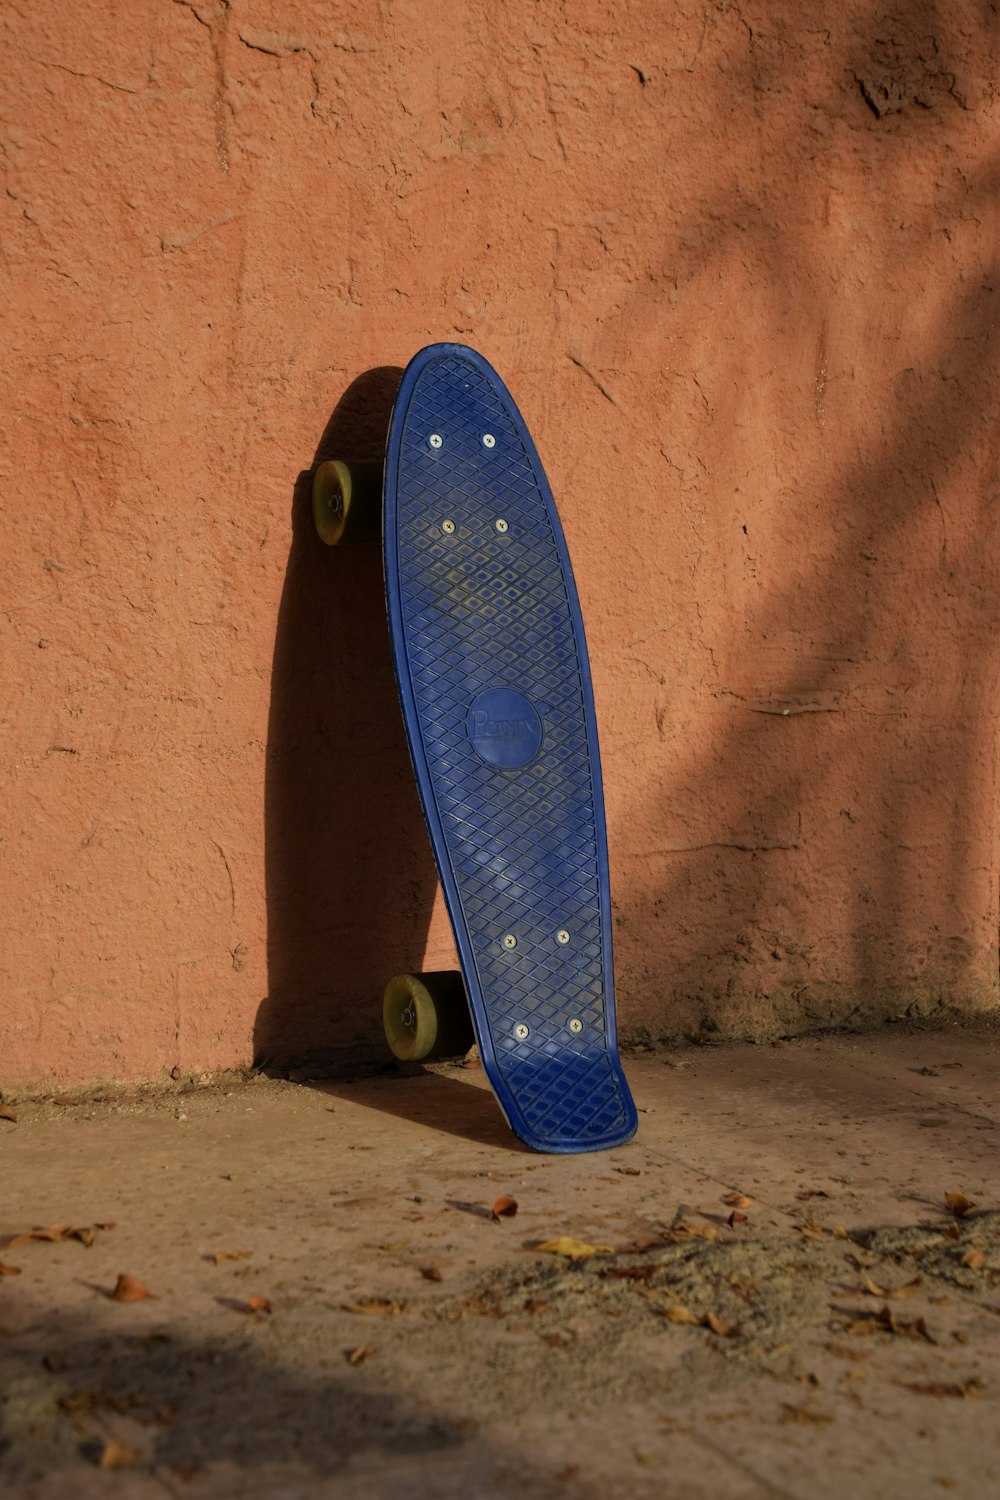 blue and white skateboard leaning on brown wall